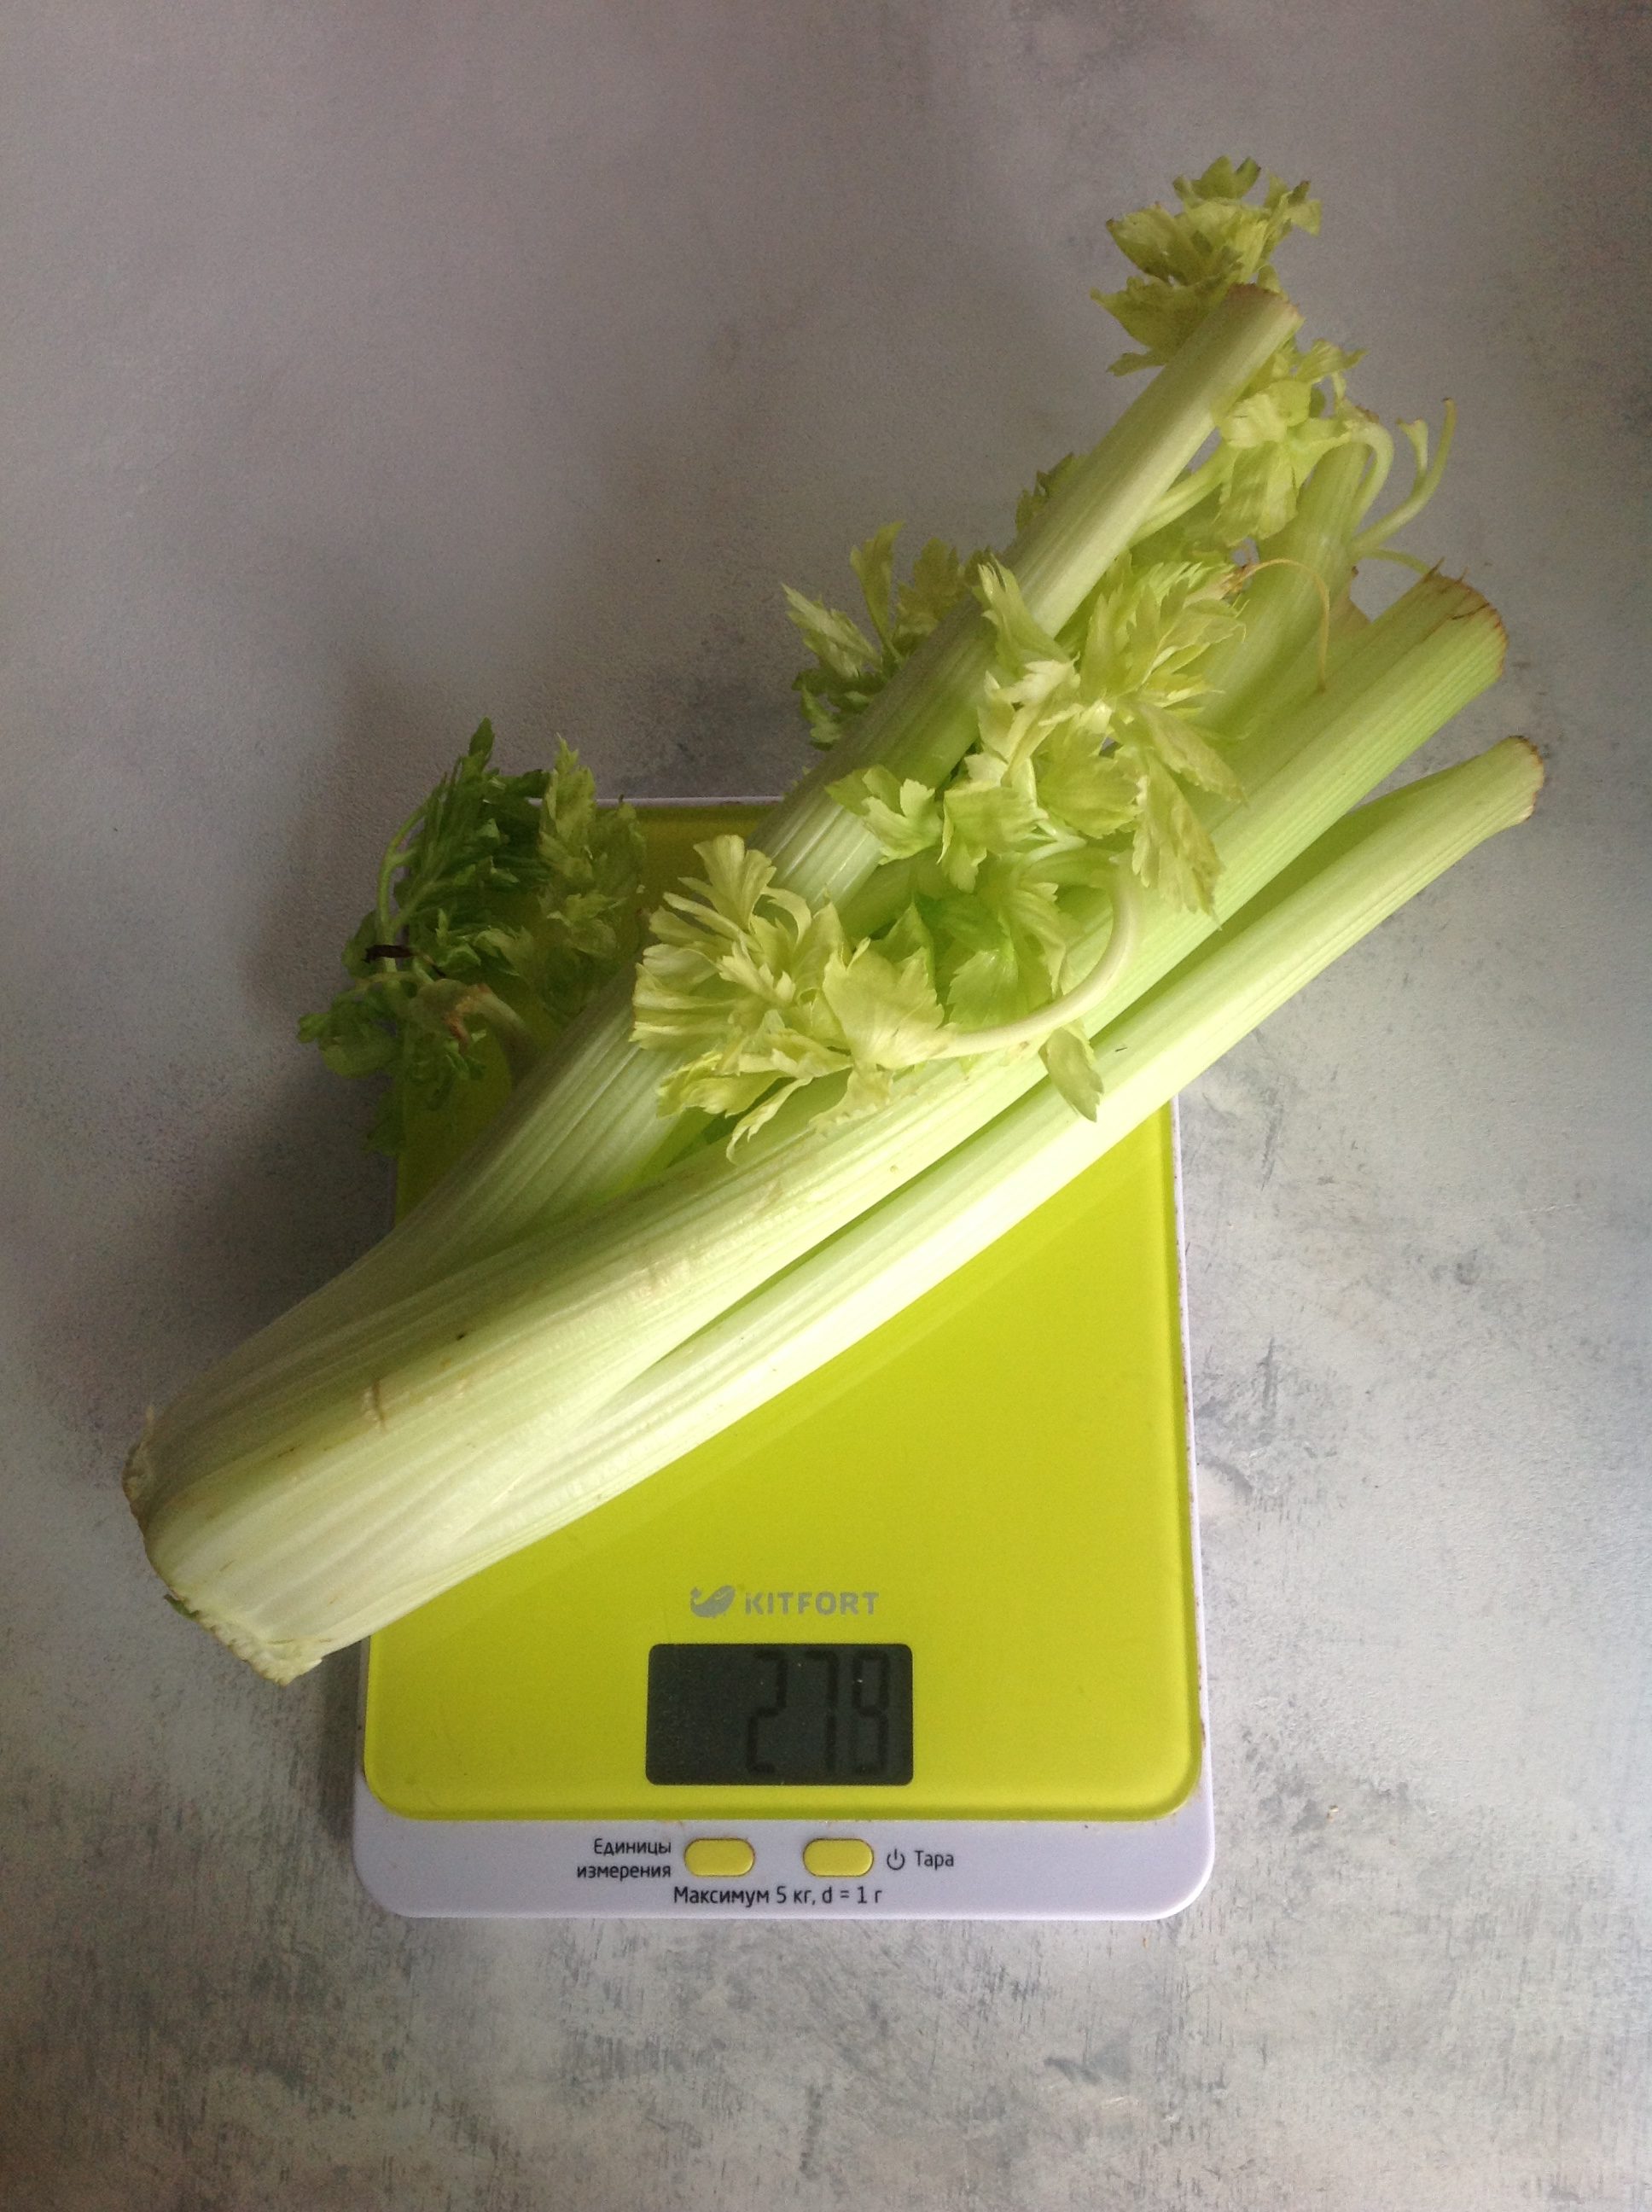 How much does celery petiole weigh?